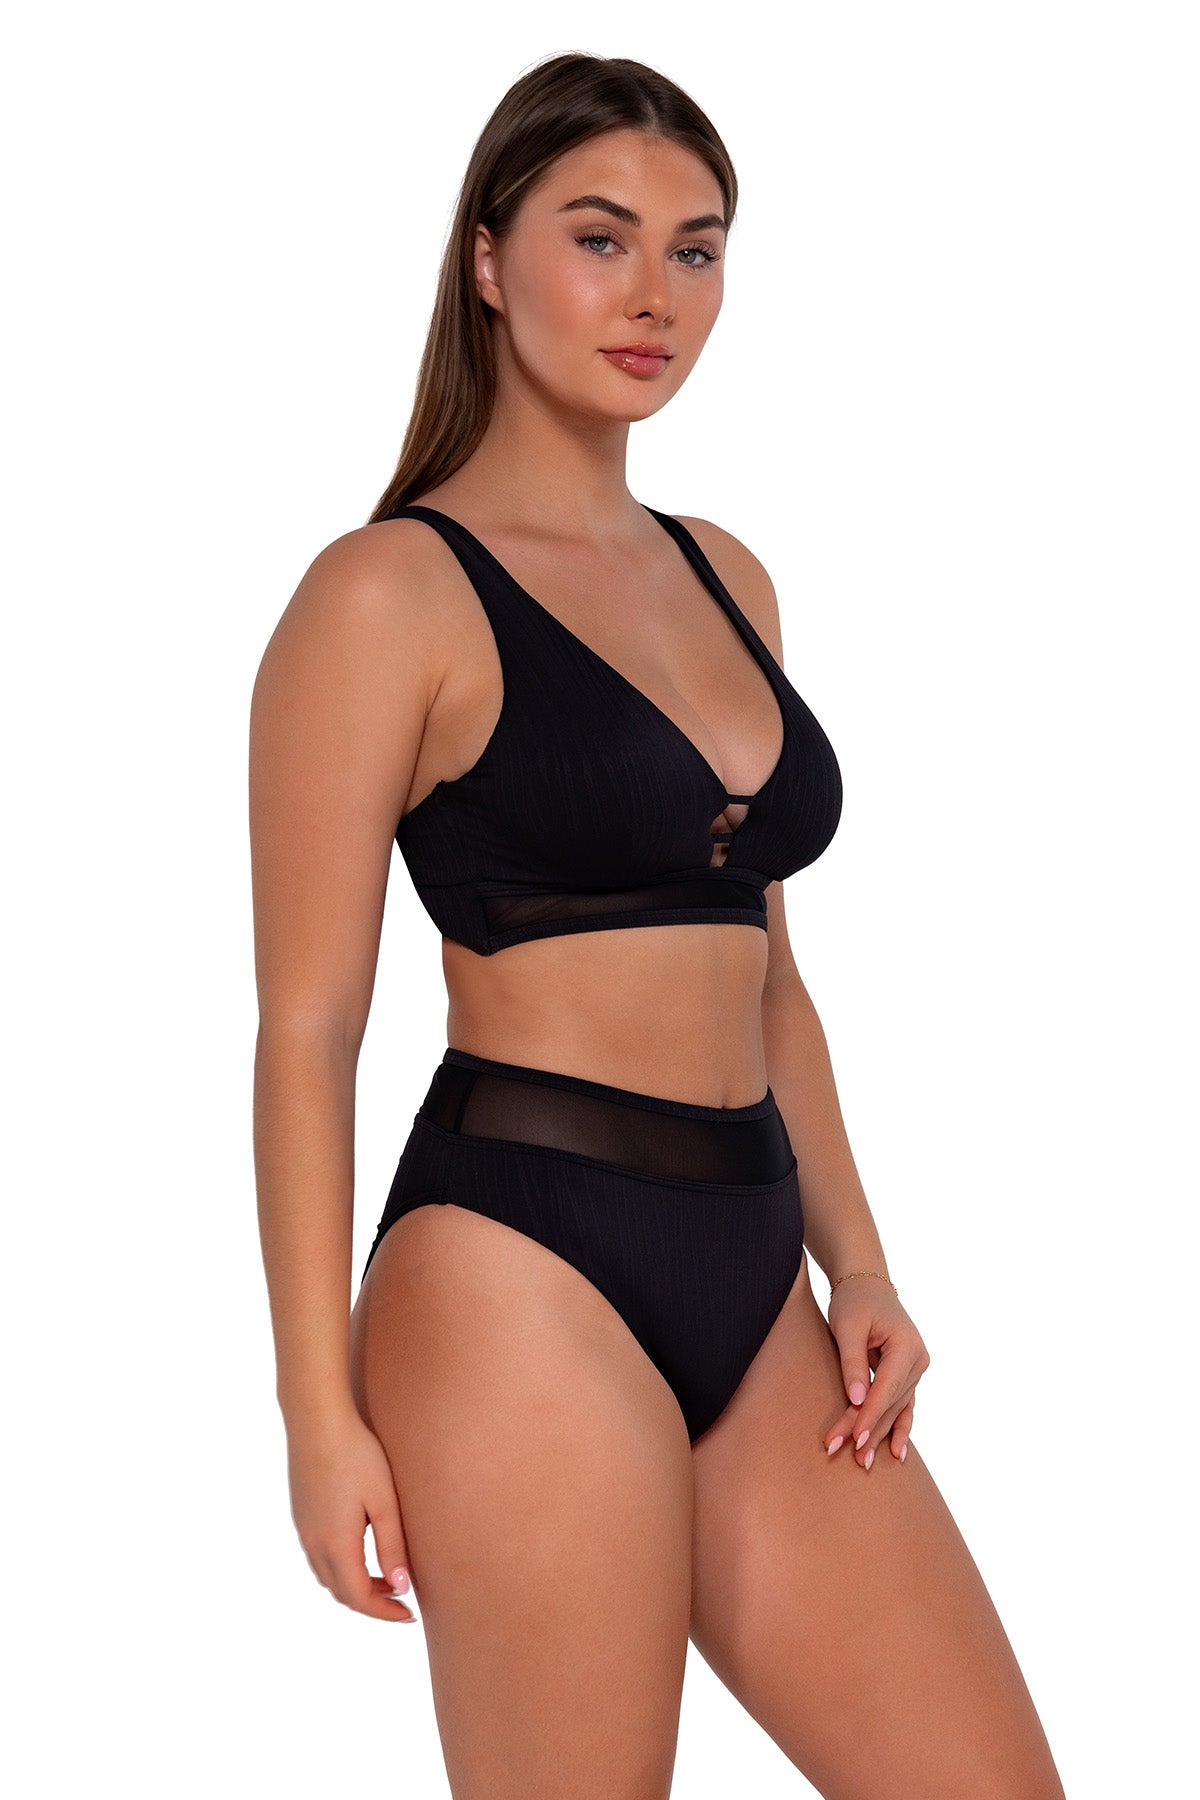 Side pose #1 of Taylor wearing Sunsets Black Seagrass Texture Annie High Waist Bottom with matching Danica underwire bikini top